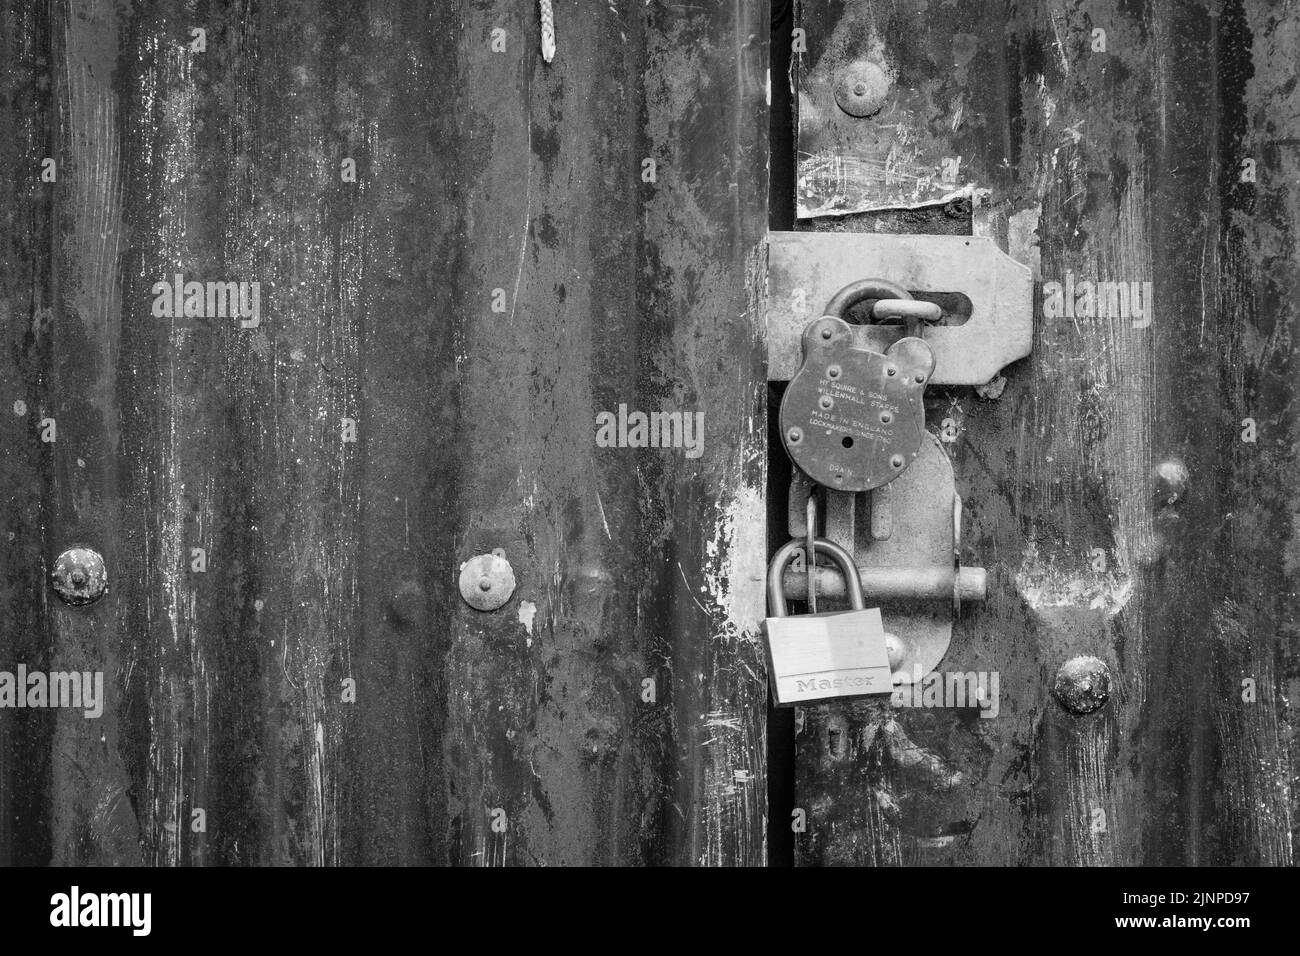 Monochrome image of two padlocks on outdoor metal gateway. For locked out, data & email security, denial of service, Covid lockdown, keep out, access Stock Photo